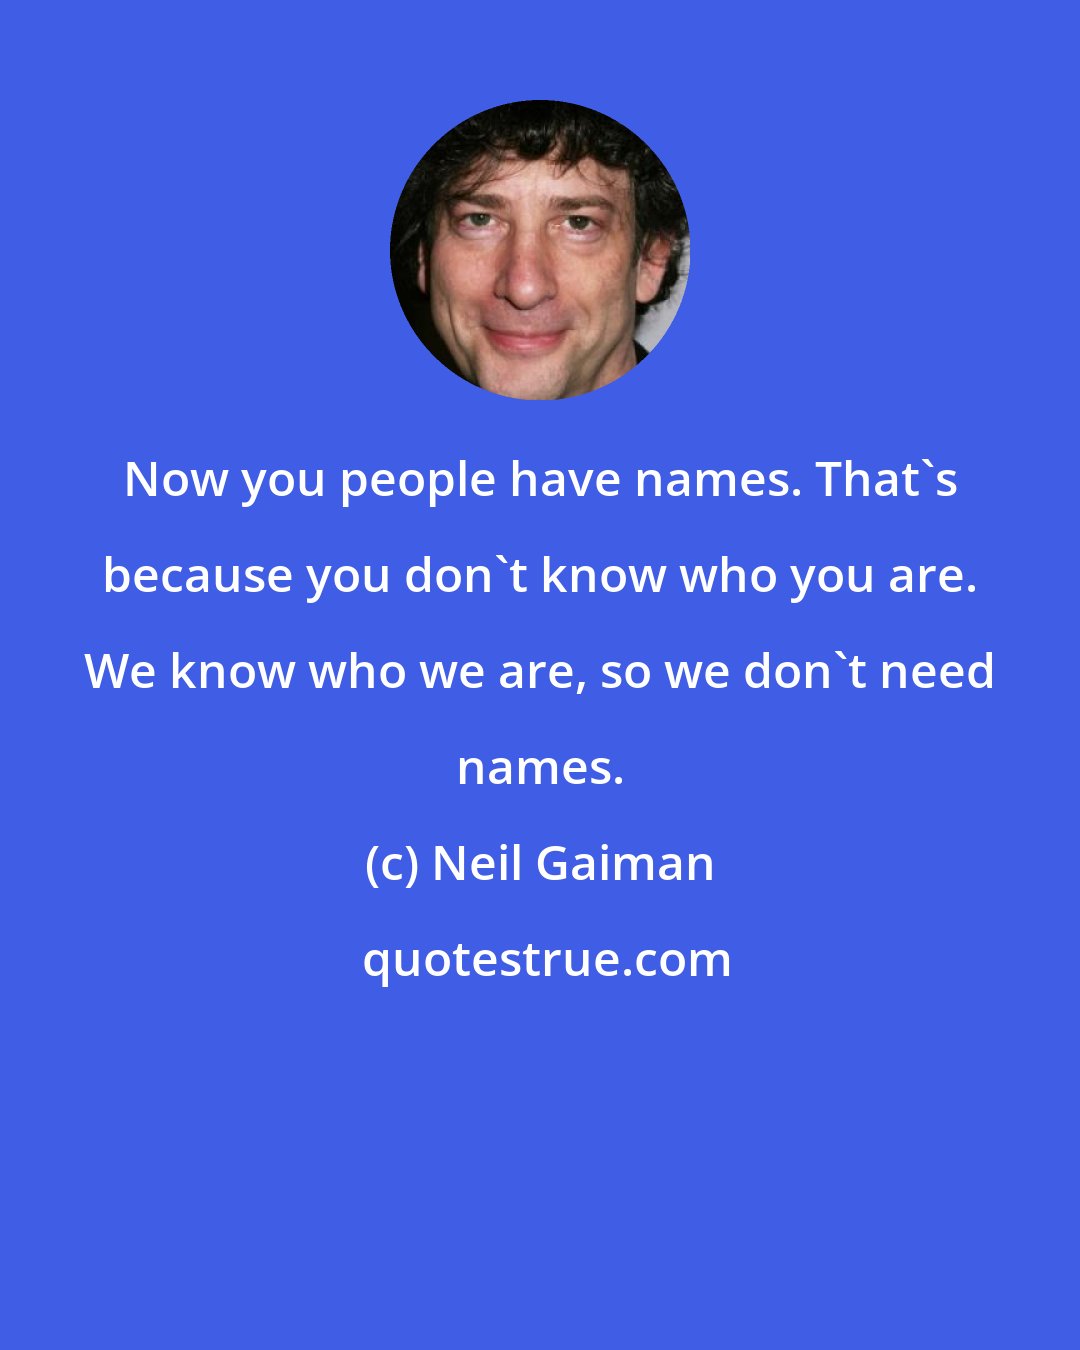 Neil Gaiman: Now you people have names. That's because you don't know who you are. We know who we are, so we don't need names.